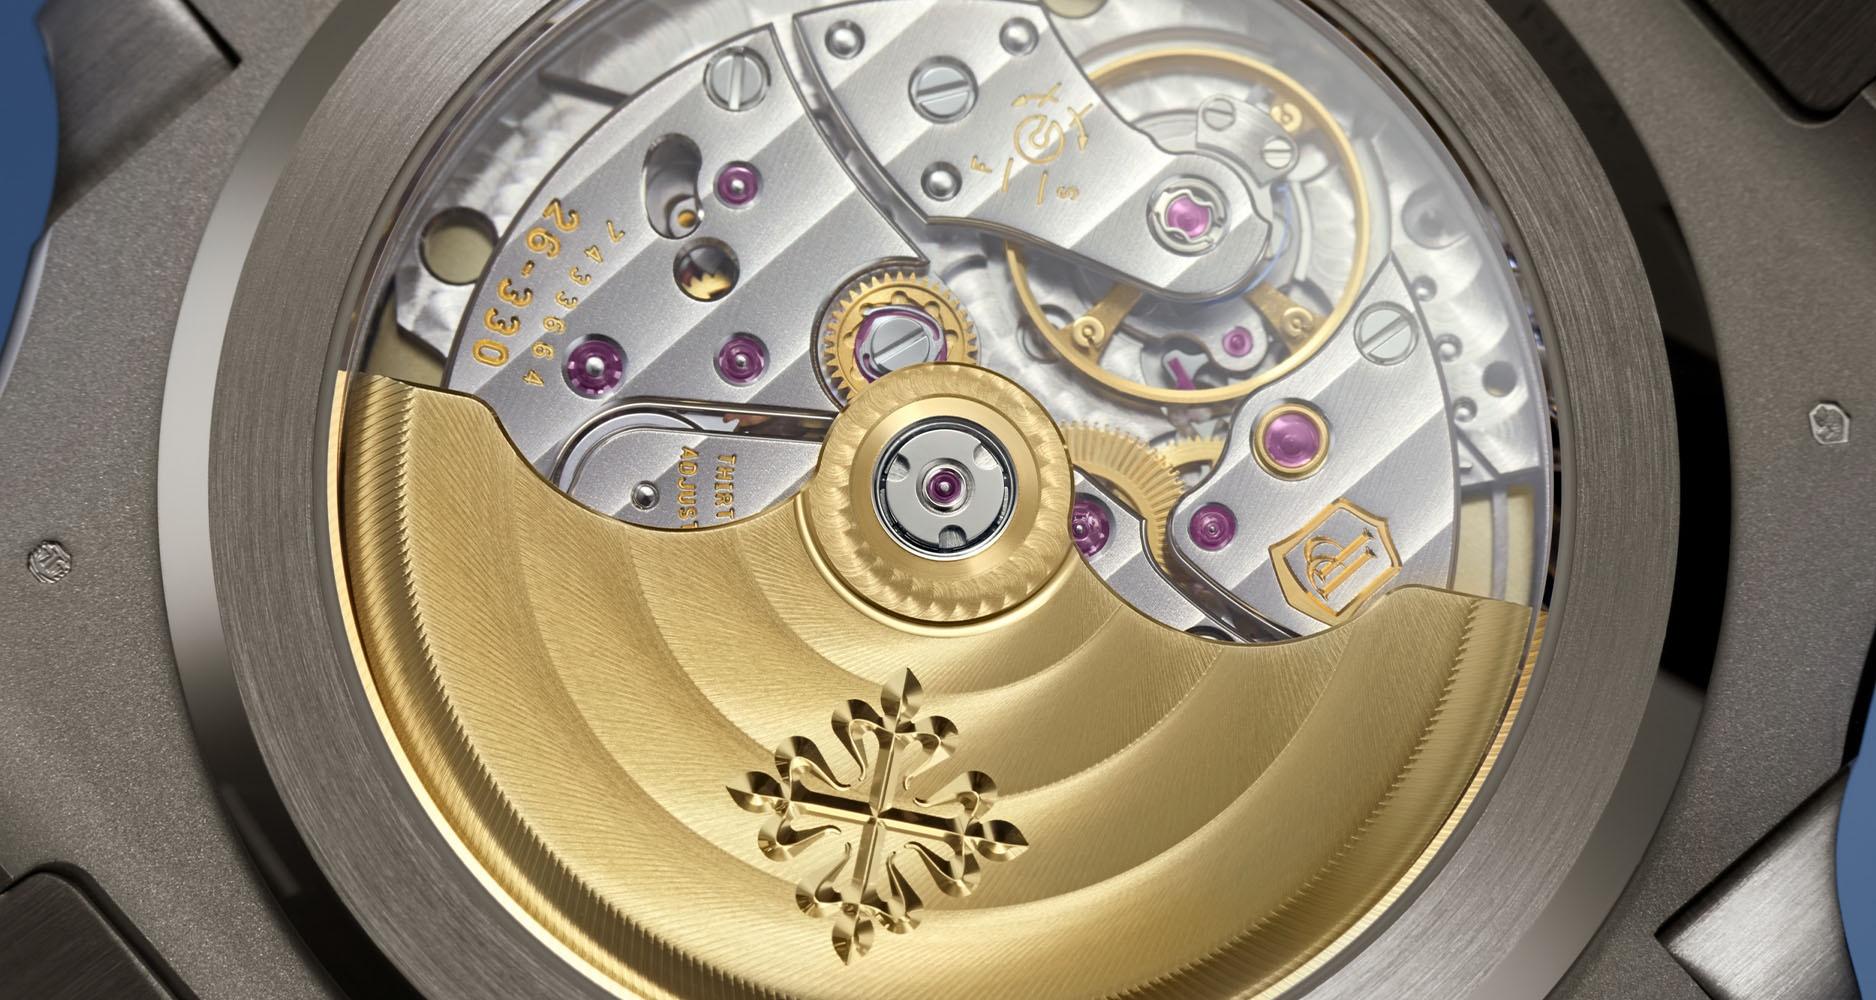 Through the fixed caseback of the Patek Philippe Ref. 5811/1G-001, you can see the Calibre 26-330 S C.